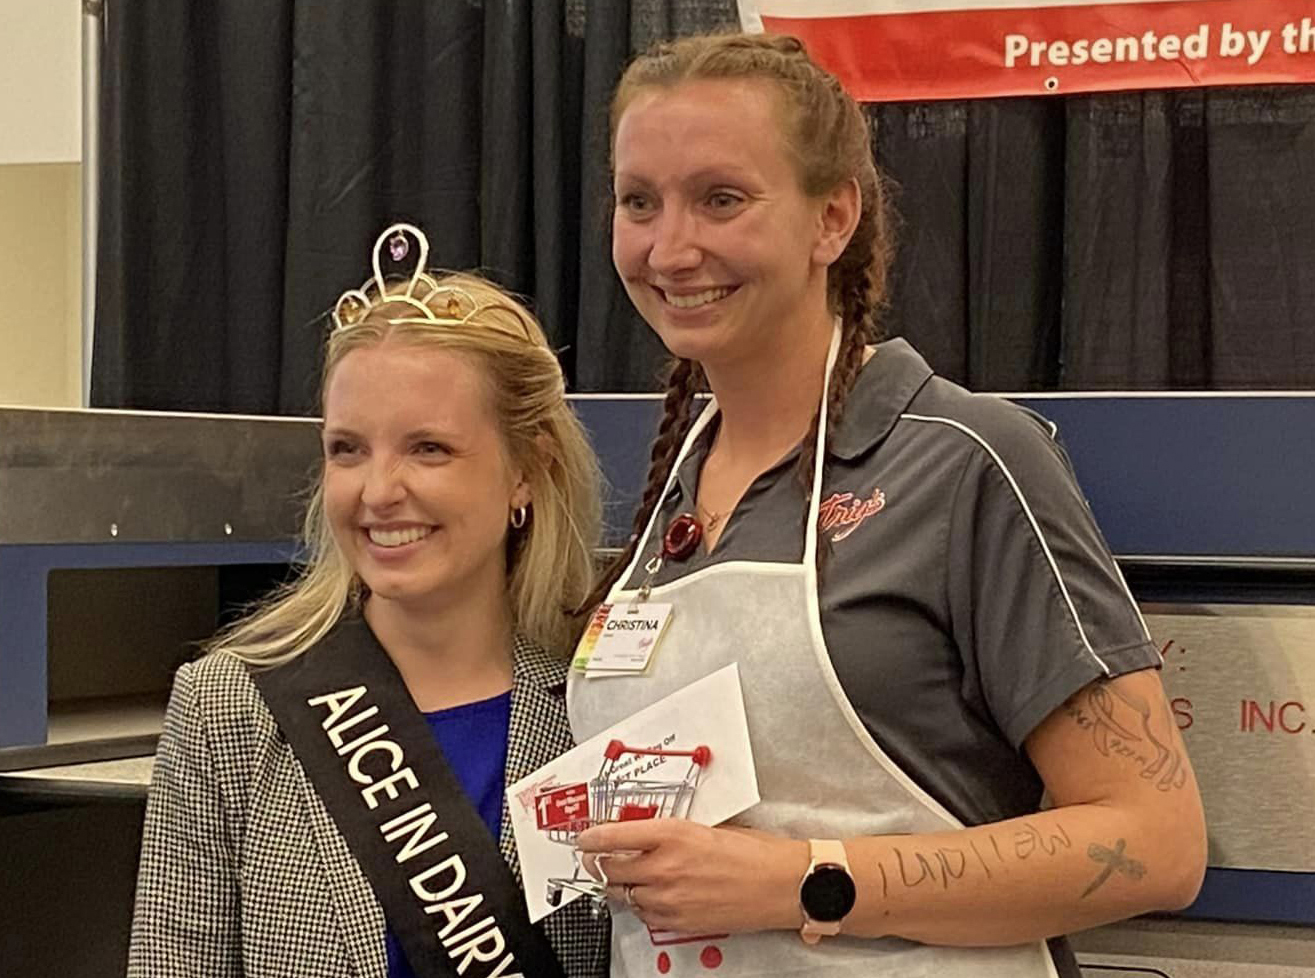 Trig’s Tomahawk employee Christina Powers to compete for National Best Bagger title